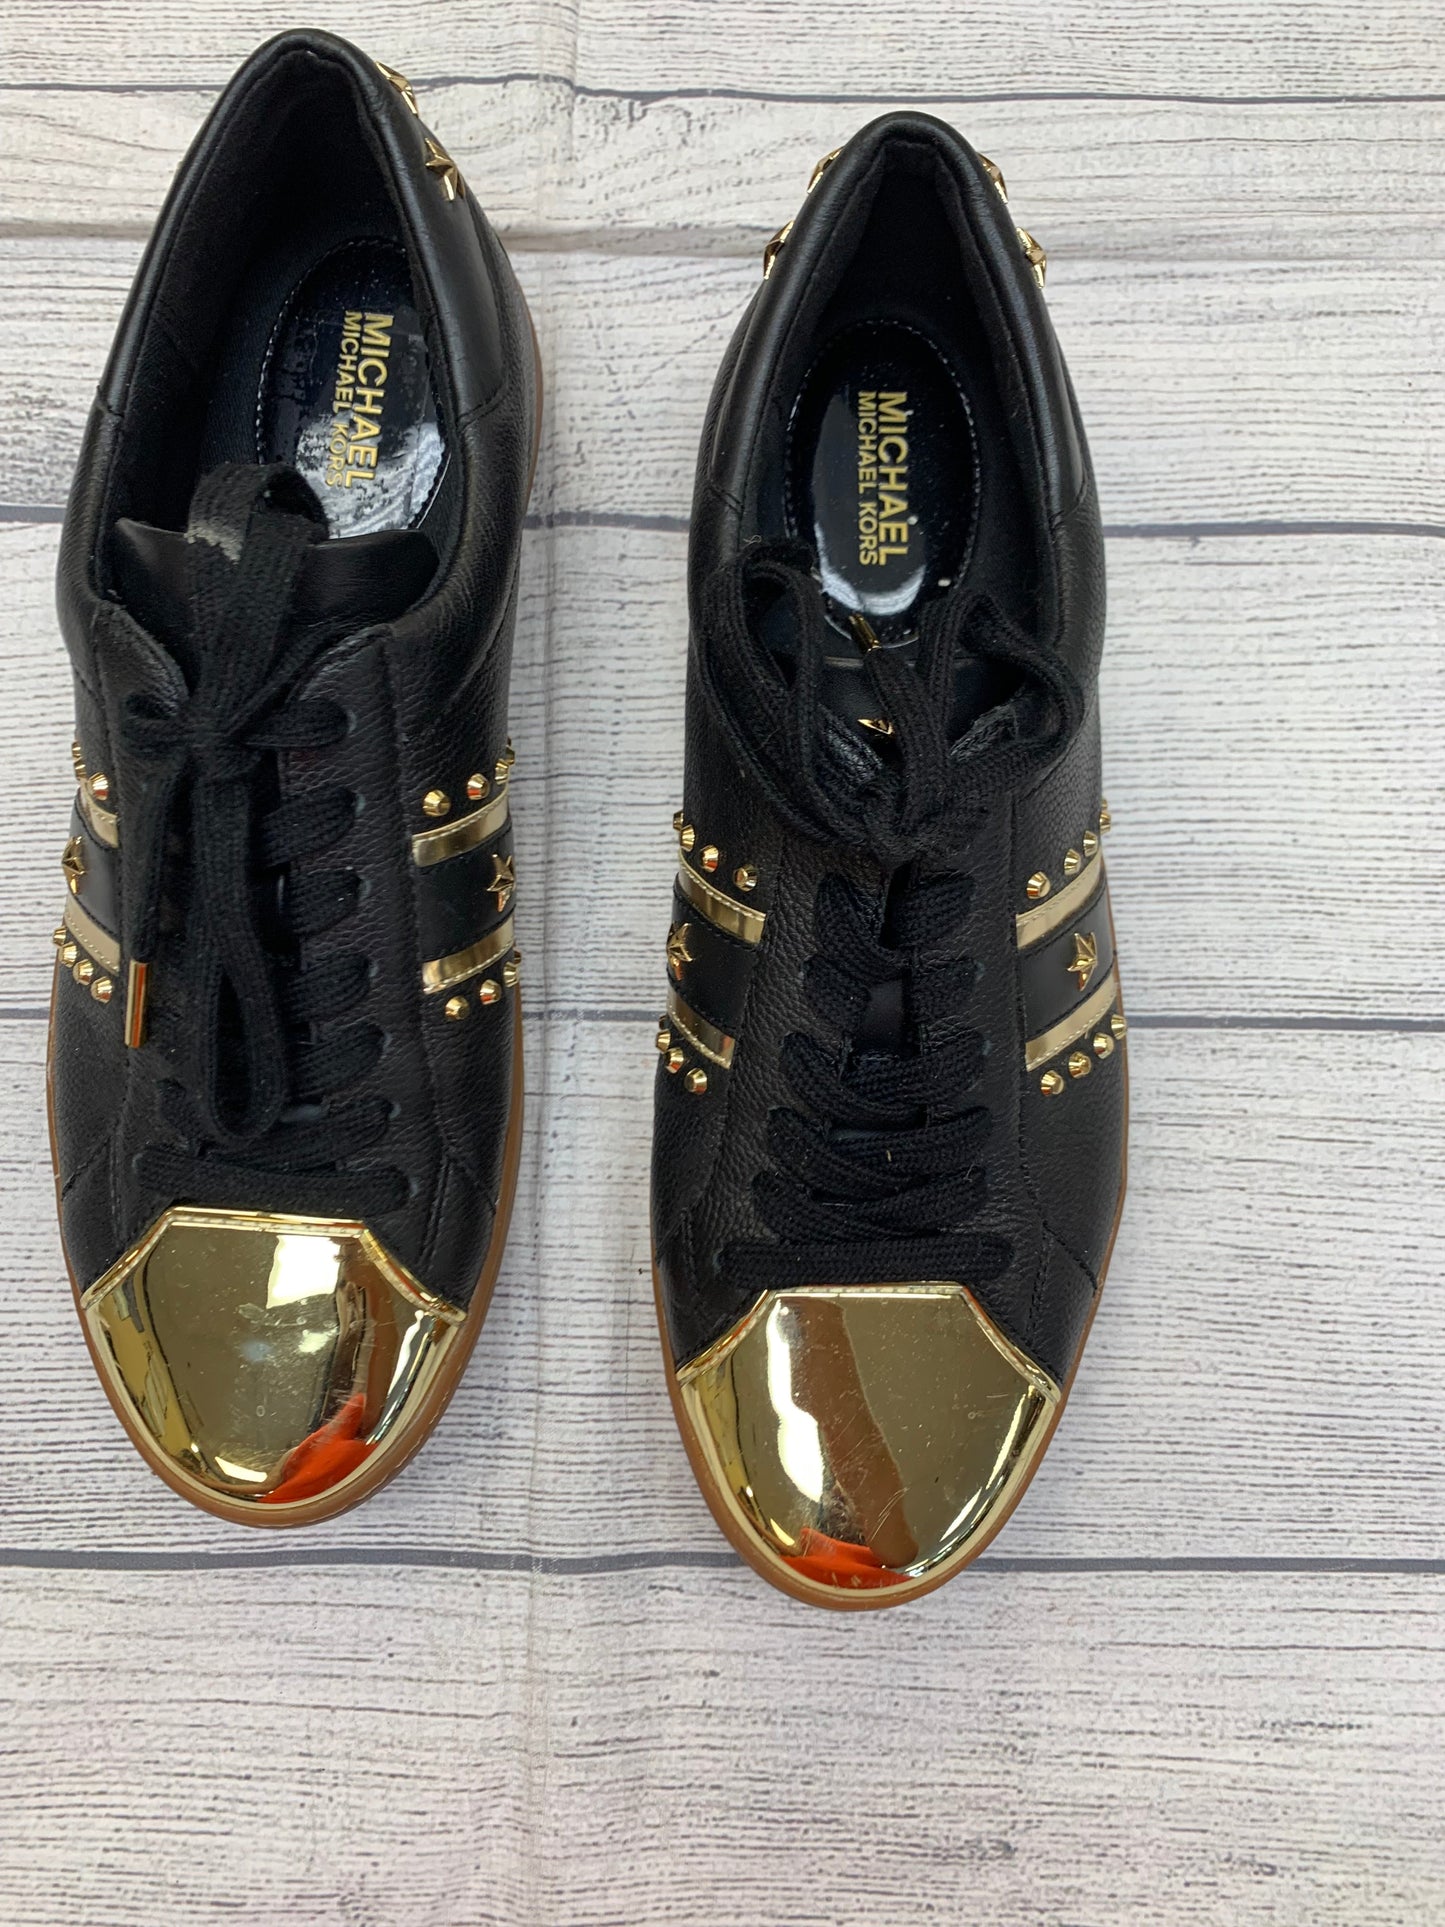 Black & Gold Shoes Sneakers Michael By Michael Kors, Size 8.5